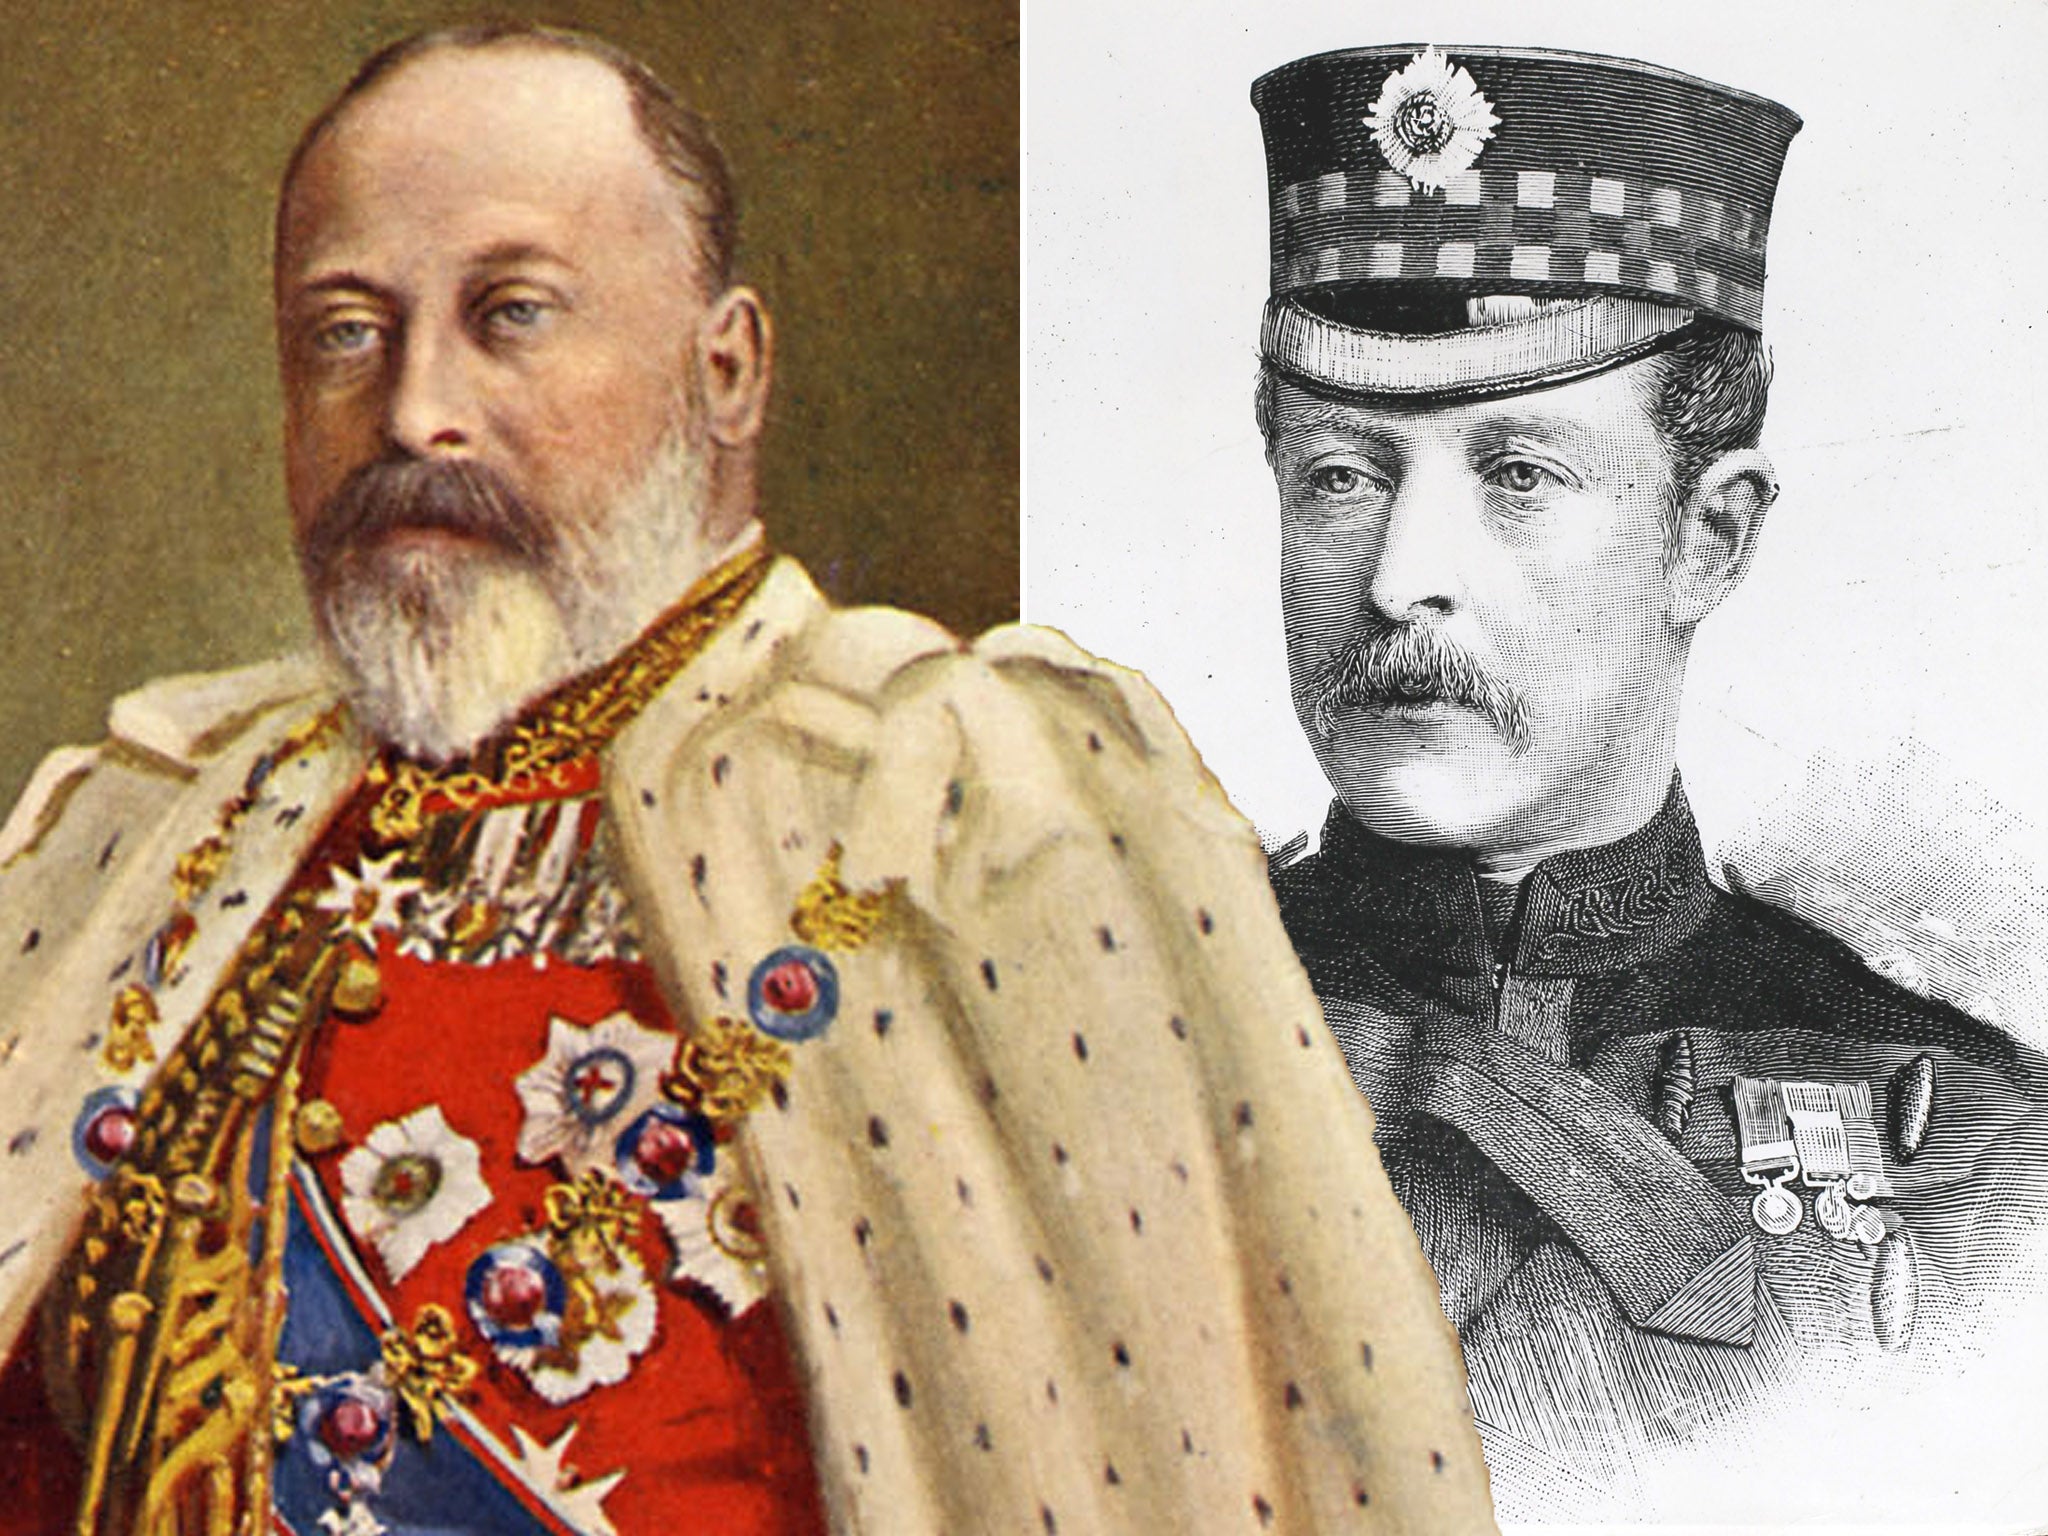 The future King Edward VII (left) was staying at Tranby Croft for the Doncaster races along with friends including Lieutenant Colonel Sir William Gordon-Cumming, 4th Baronet, of the Scots Guards